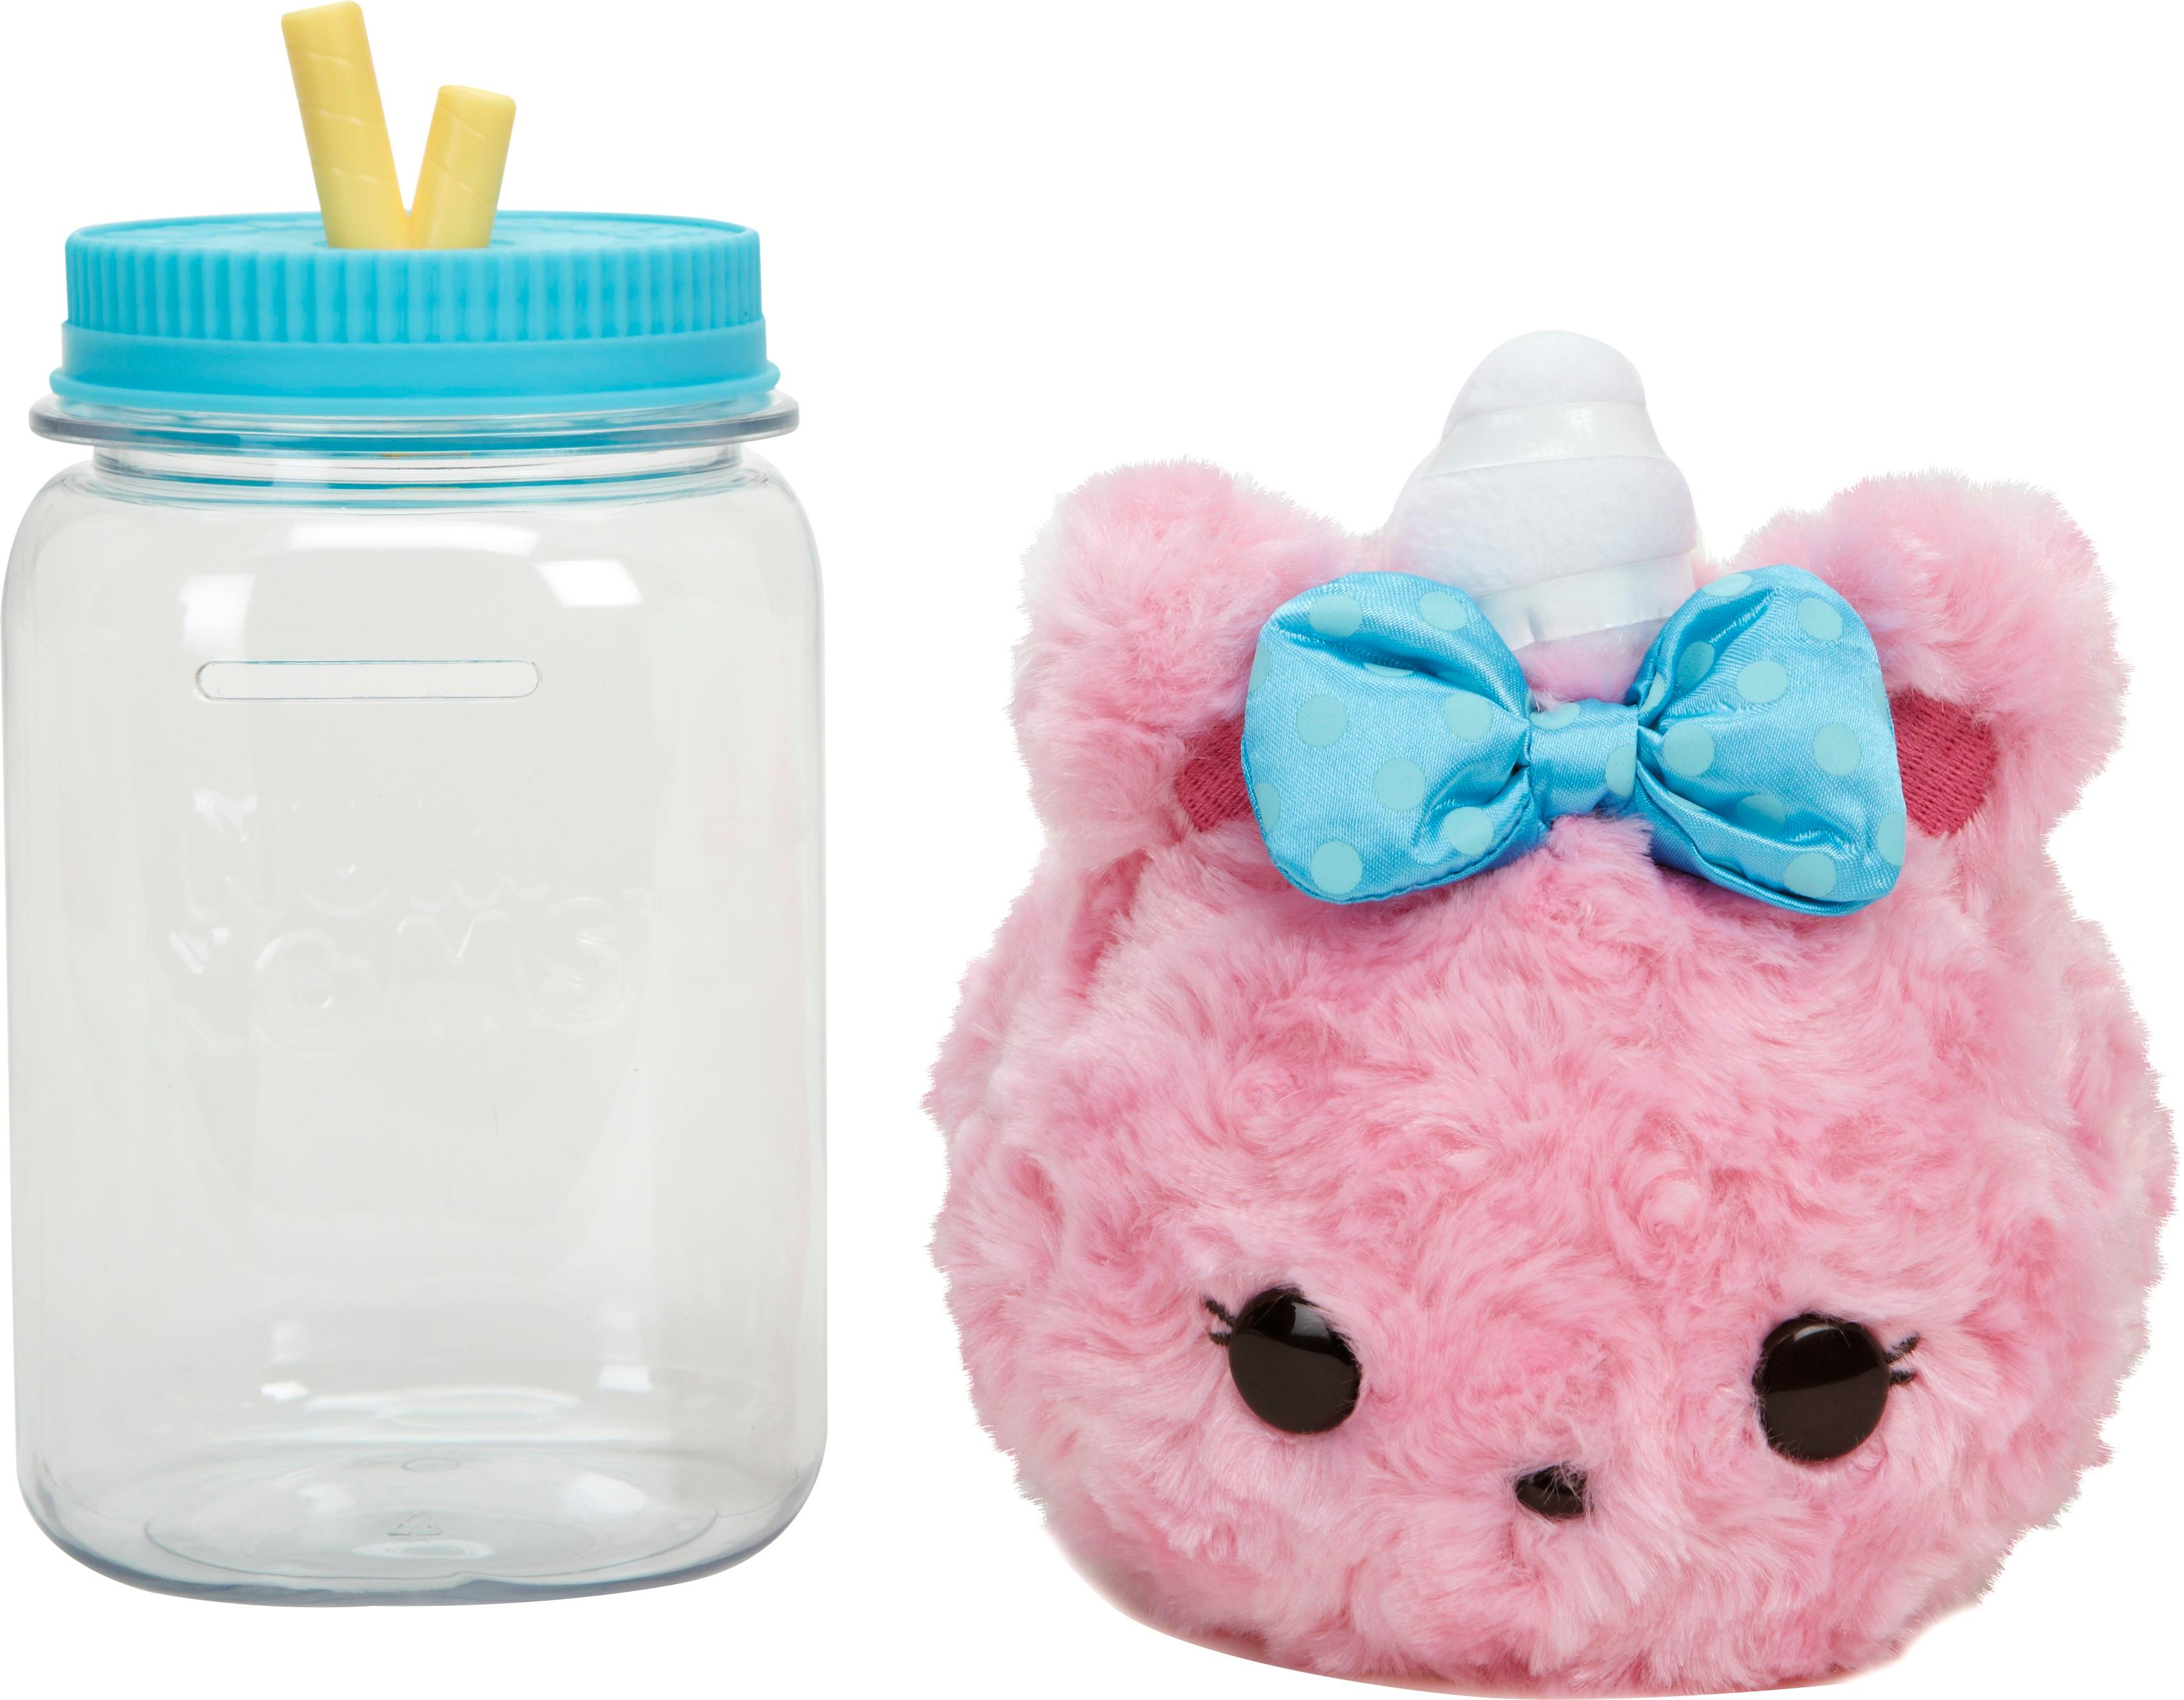 Num Noms! Adorably Cute Scented Collectible Characters